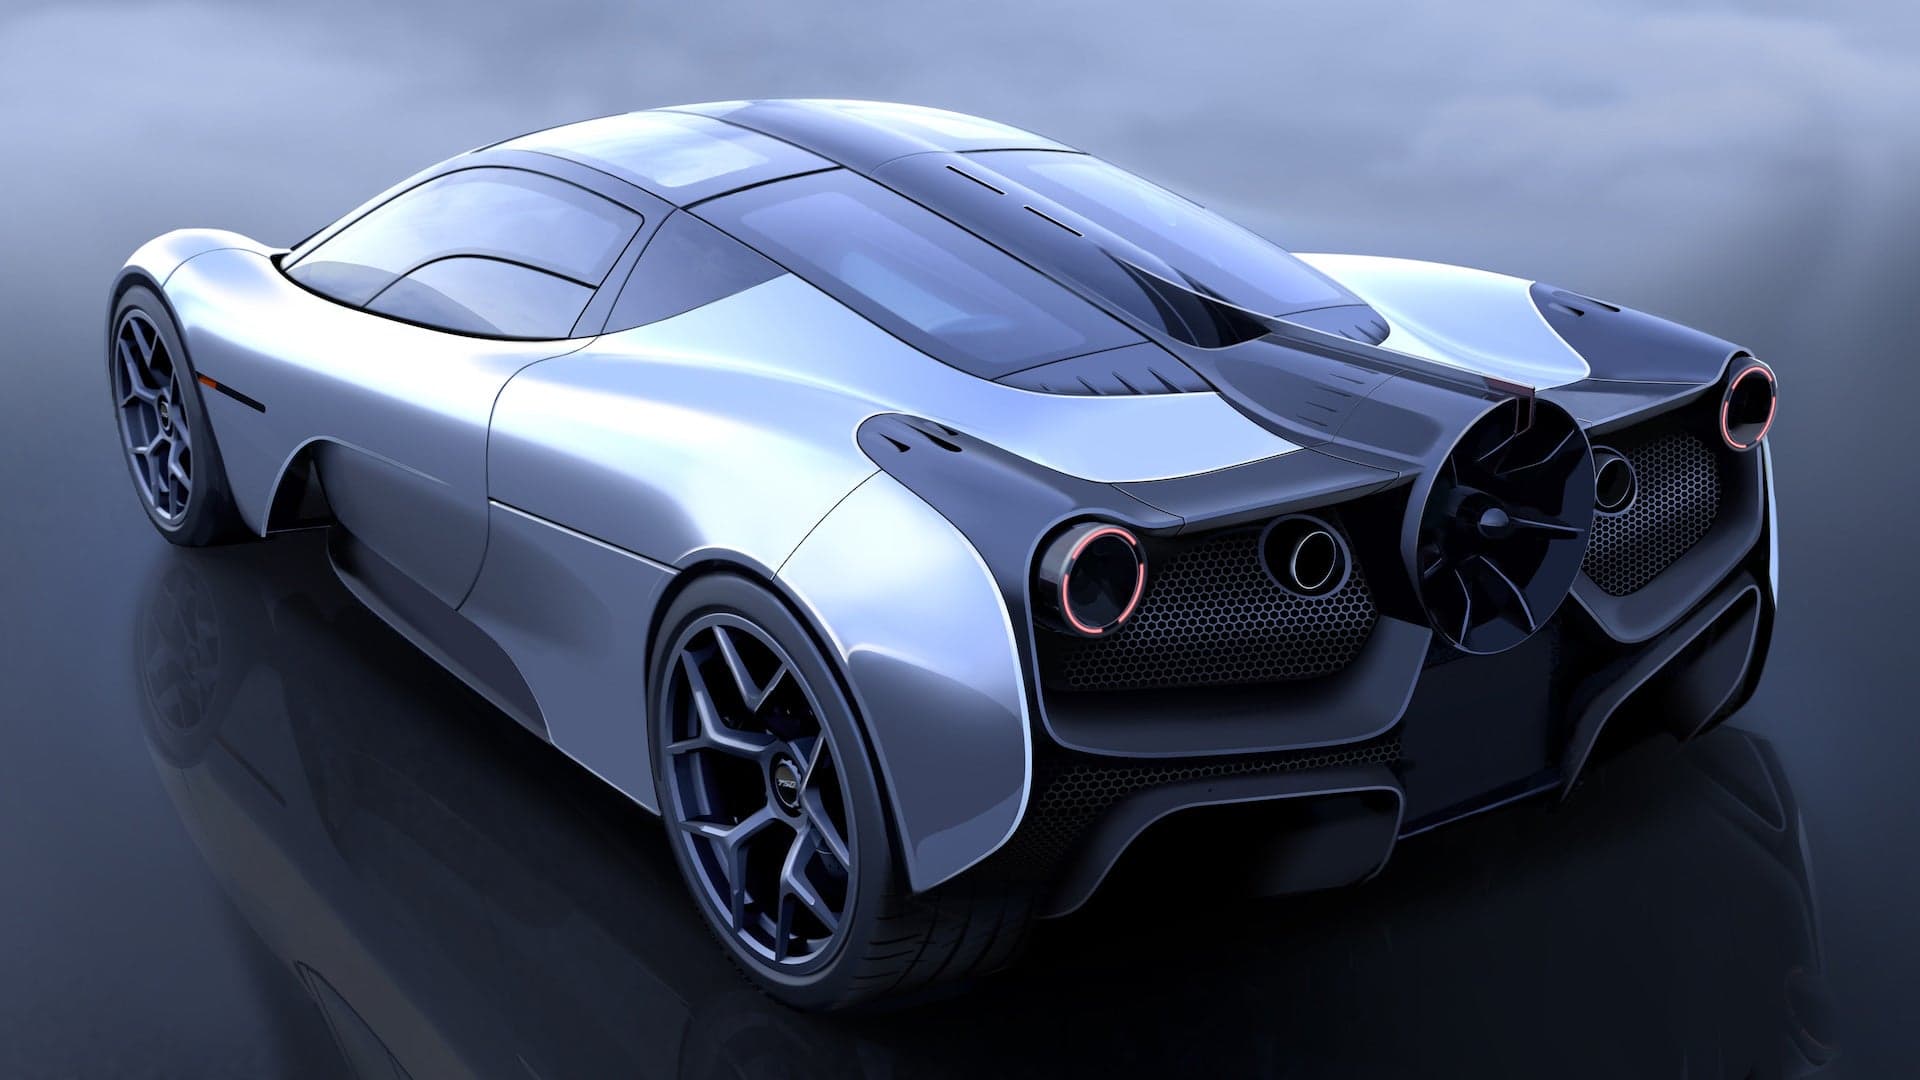 Gordon Murray’s McLaren F1 Successor Launches in May With Aero Work by F1 Team